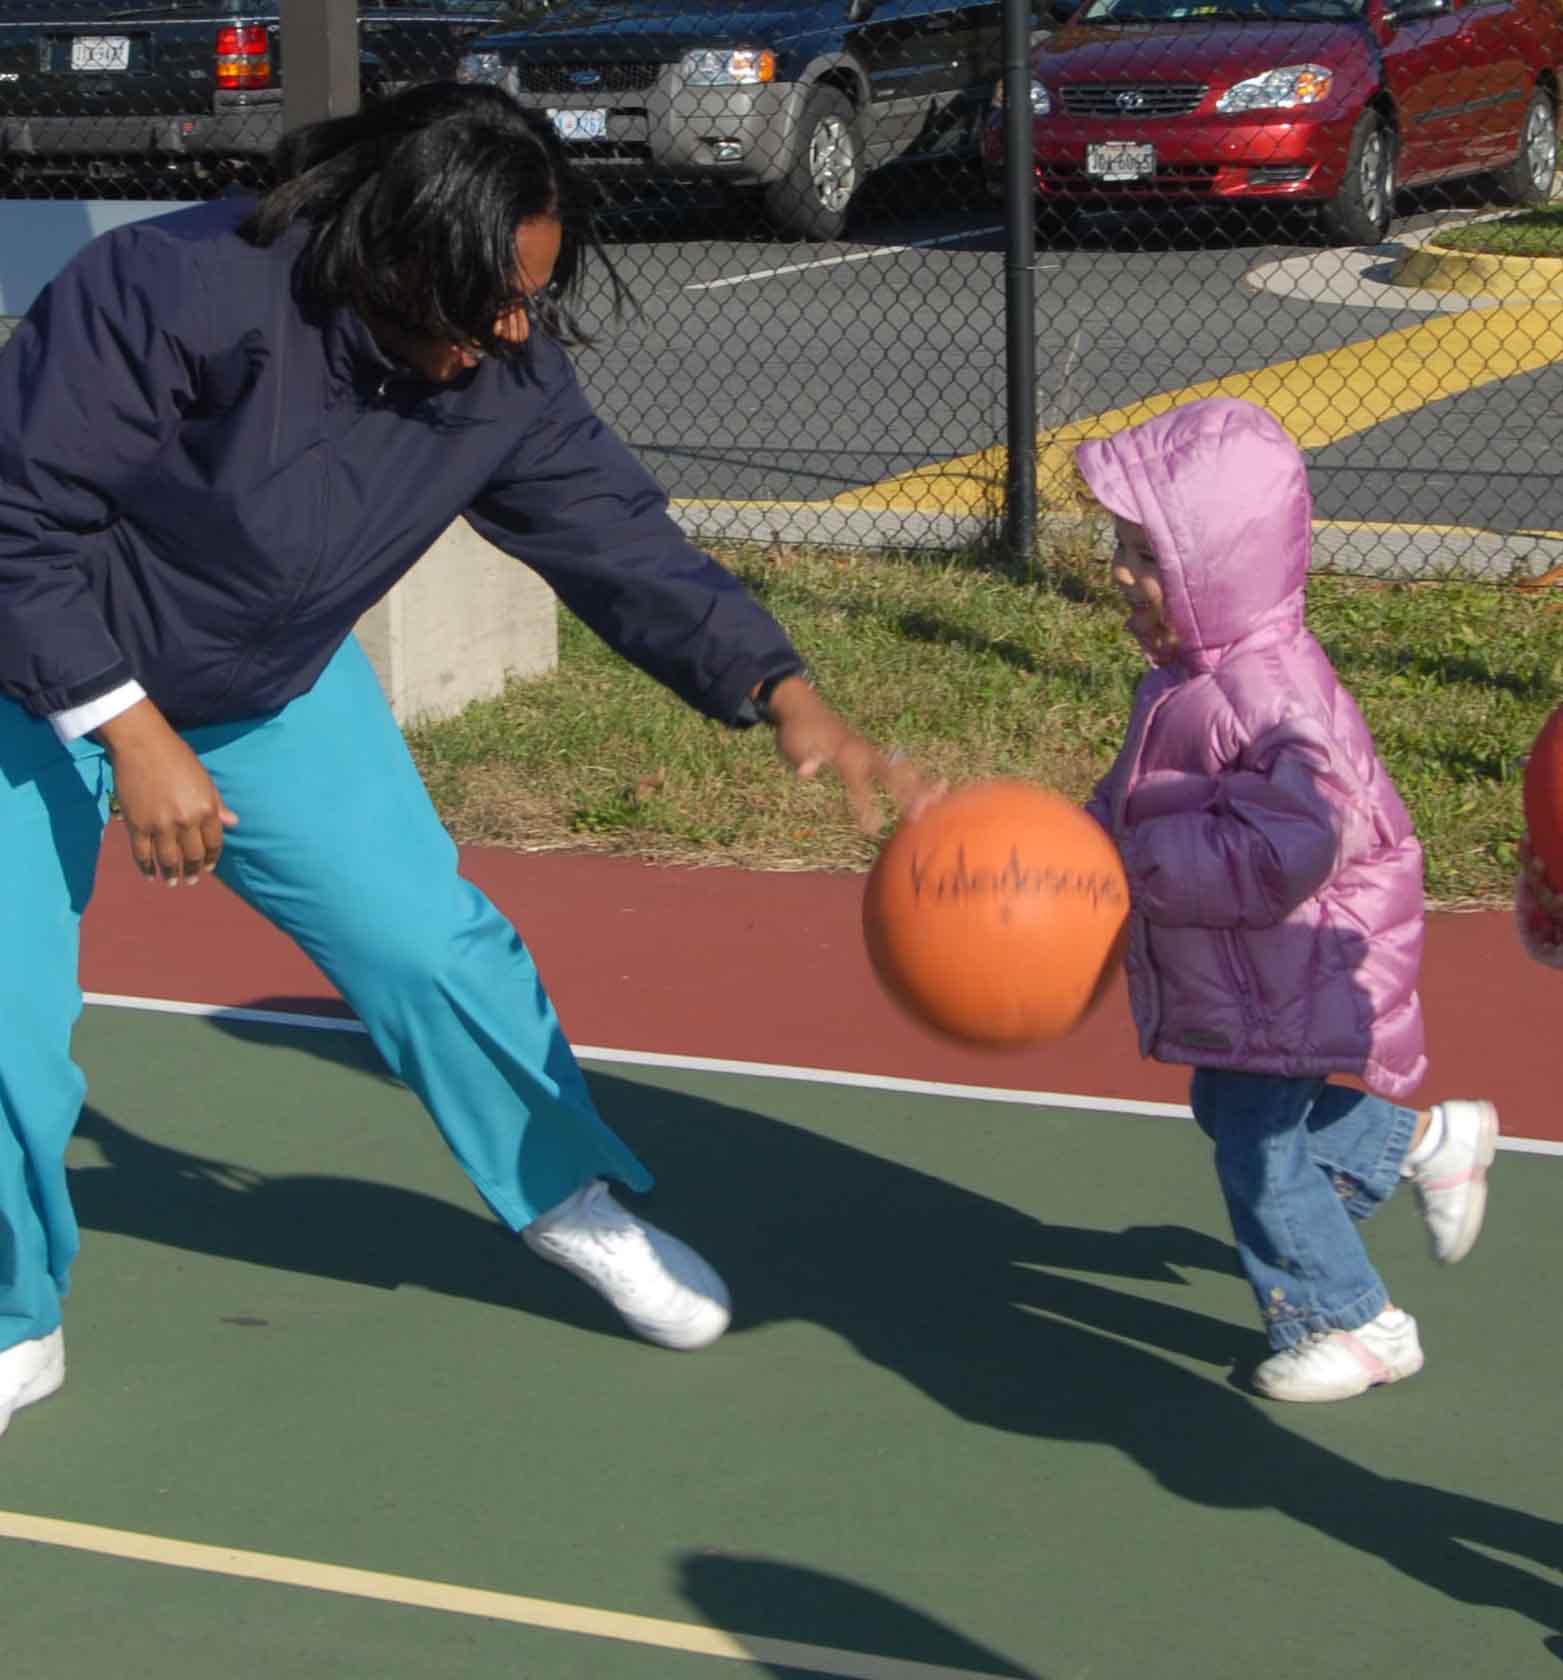 Planning for a daily "after-school recess" time can help parents work a little more active playtime in their children's busy lives.